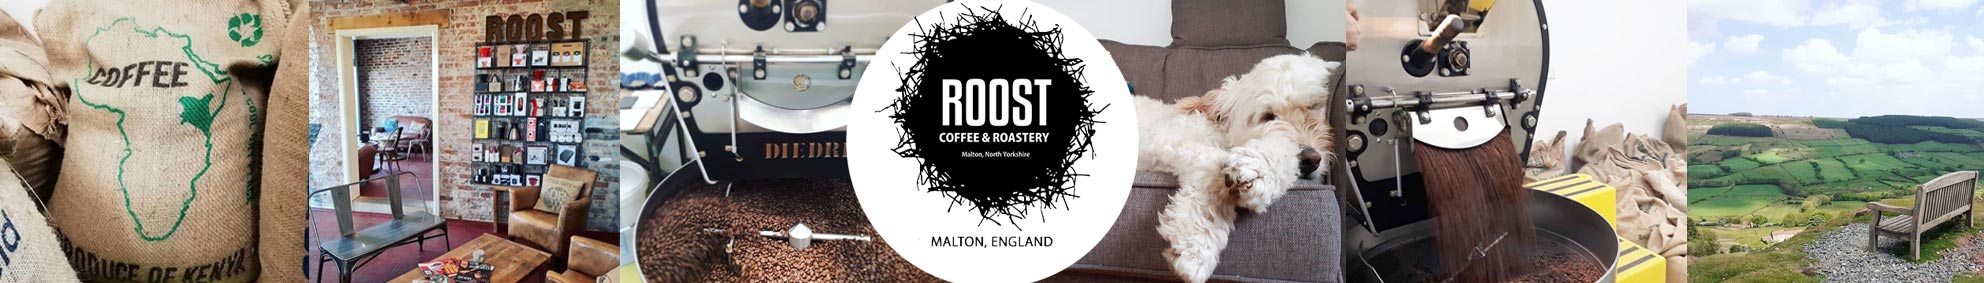 Roost Coffee Speciality Coffee Roaster Yorkshire on our Coffee Subscription